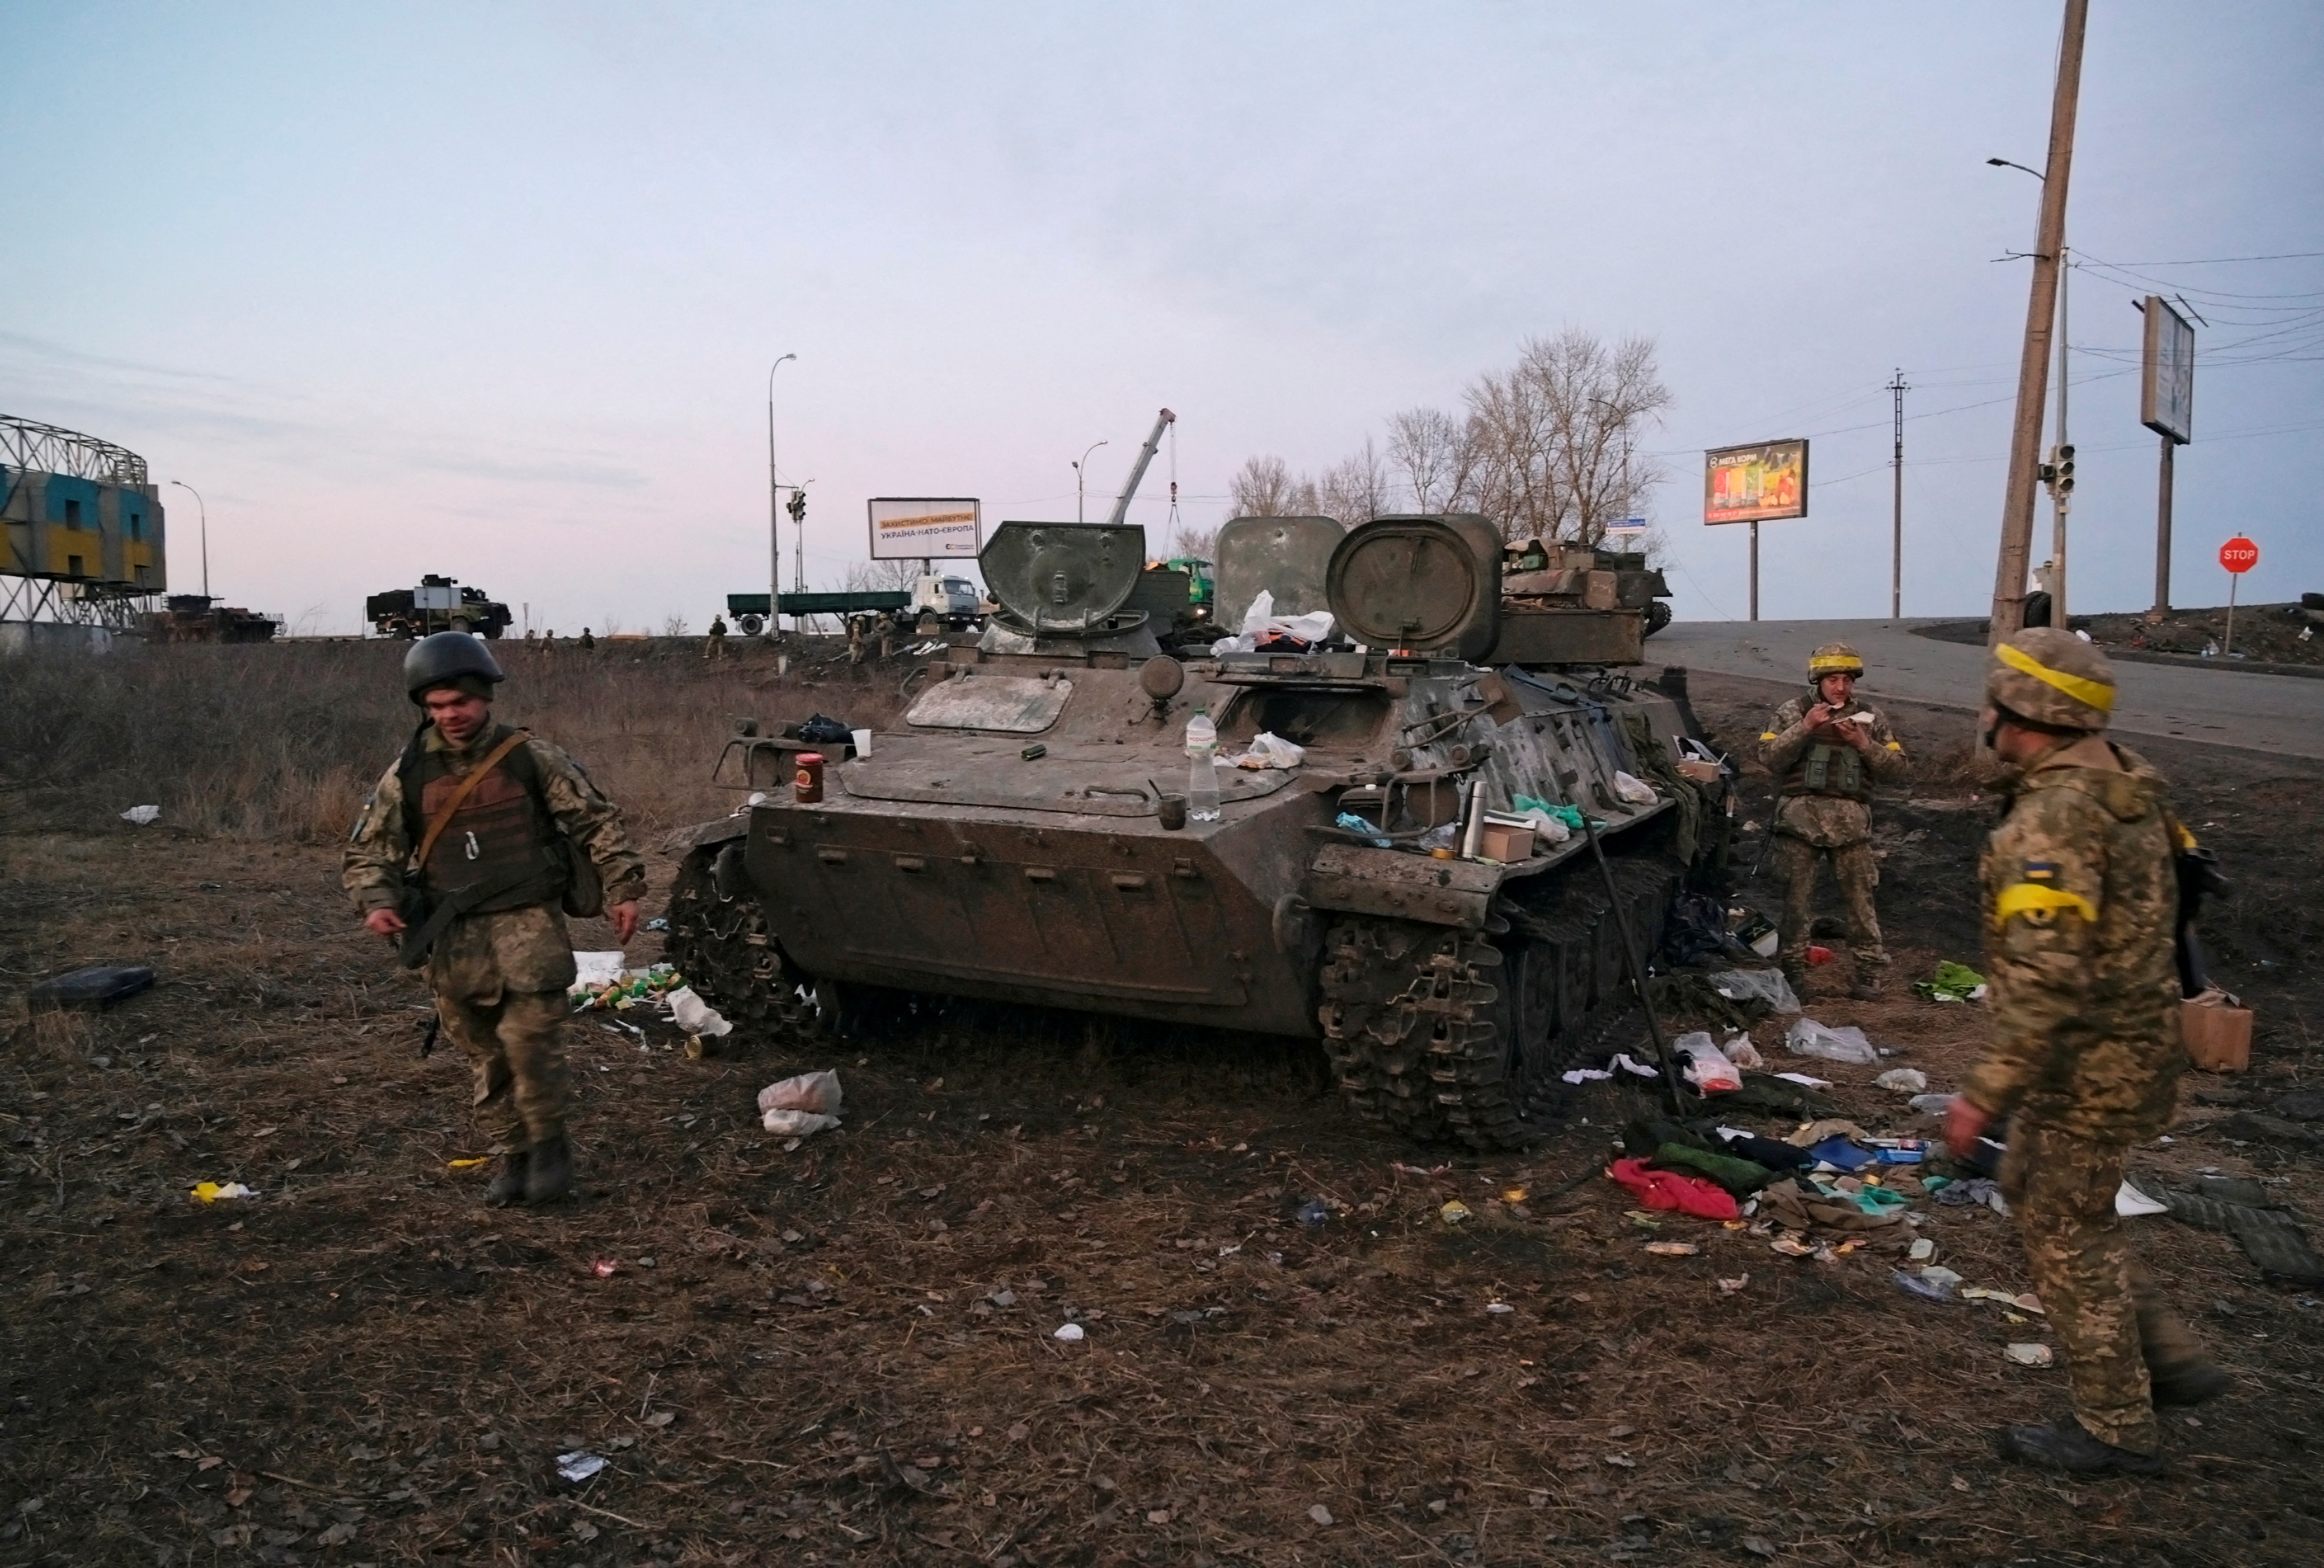 Ukrainian servicemen are seen next to a destroyed armoured vehicle, which they said belongs to the Russian army, outside Kharkiv, Ukraine February 24, 2022. REUTERS/Maksim Levin